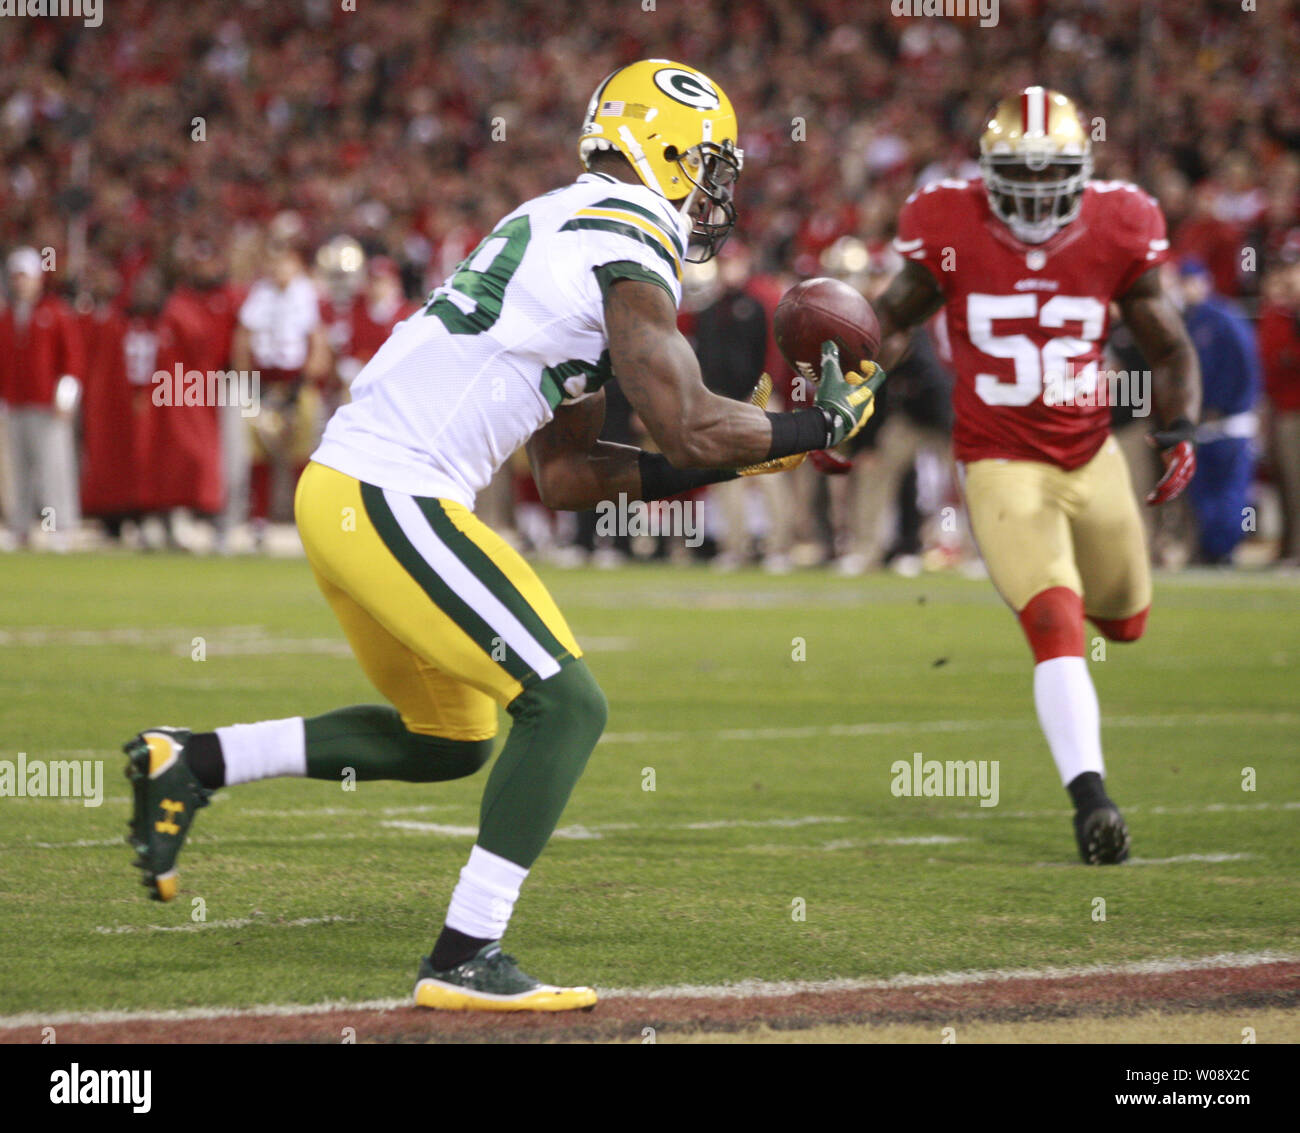 Green Bay Packers James Jones hauls in a 20 yard pass from QB Aaron Rodgers for a TD in the second quarter of the NFC Divisional Playoff against the San Francisco 49ers at Candlestick Park in San Francisco on January 12, 2013. The 49ers defeated the Packers 45-31.   UPI/Bruce Gordon Stock Photo